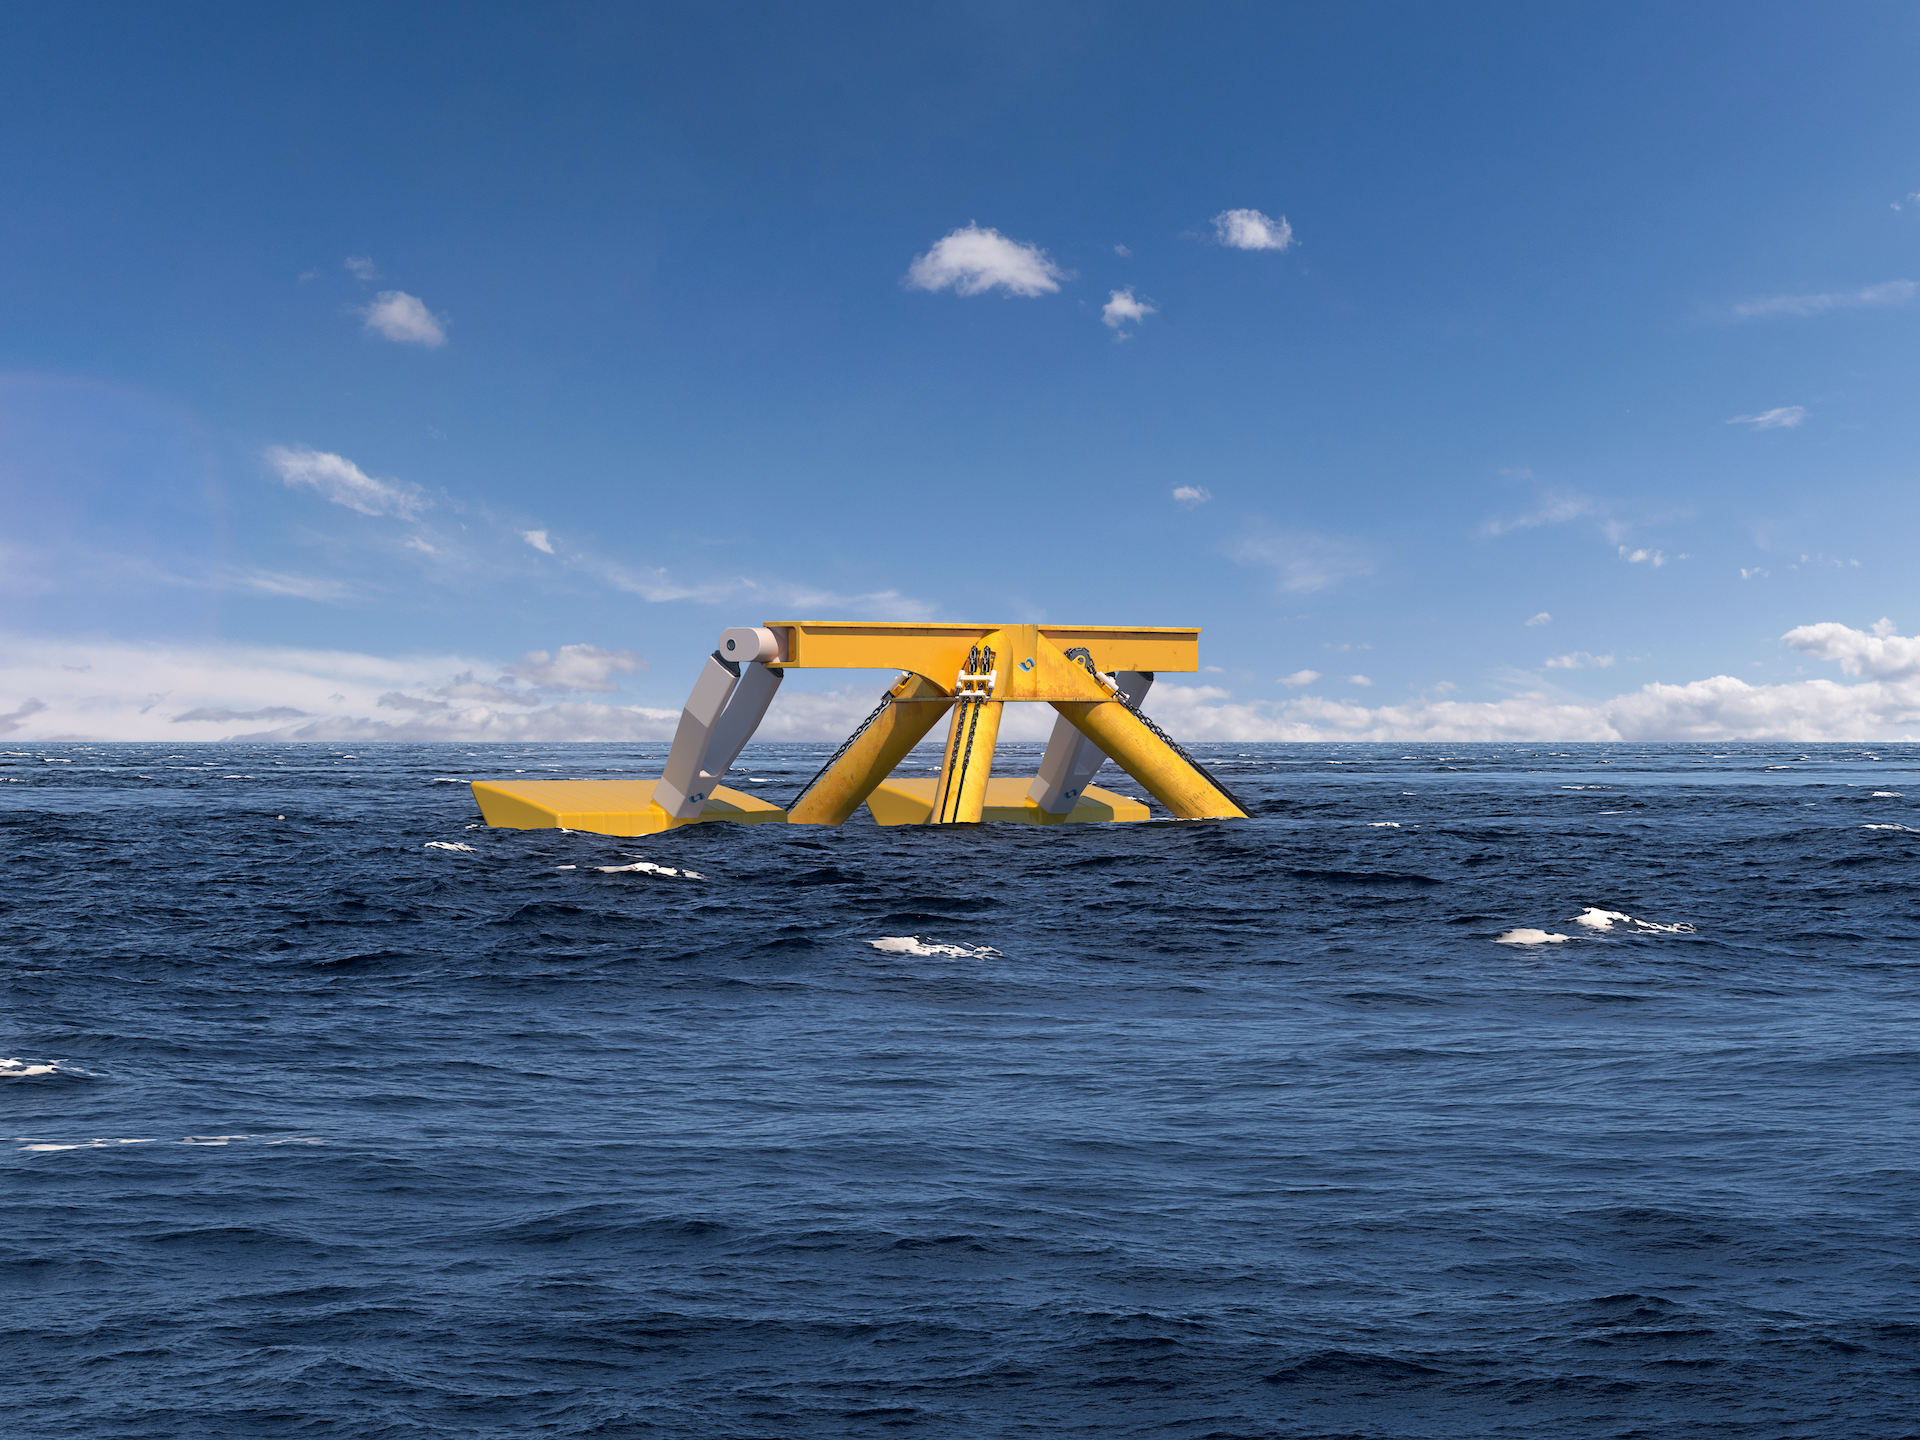 MEMBER NEWS: Marine Power Systems to demo wave energy array at EMEC